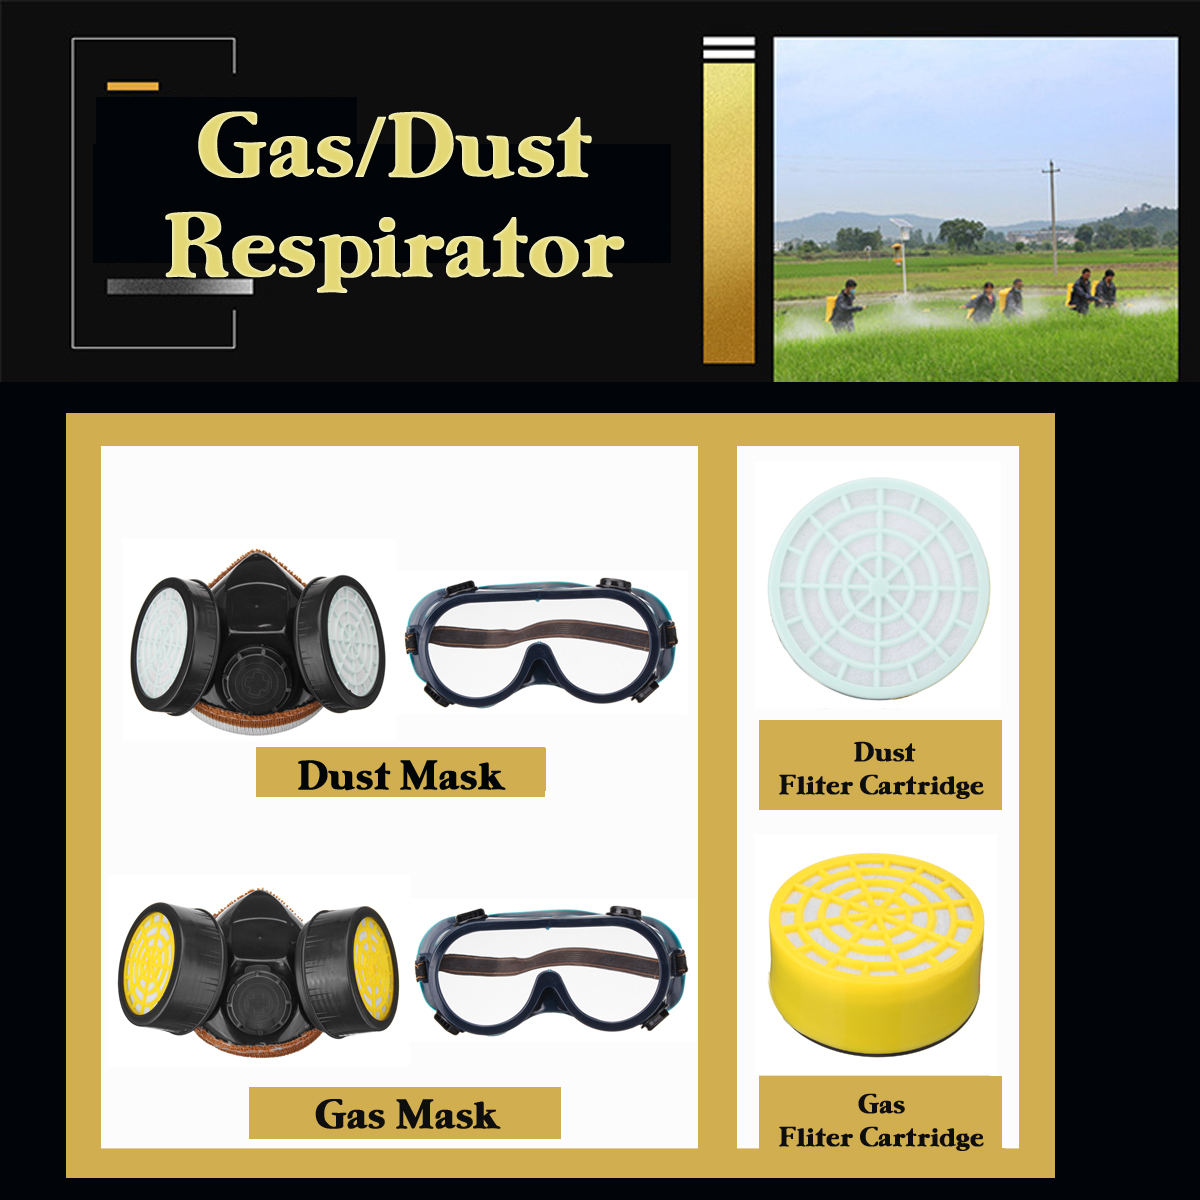 Gas-Mask-Protection-Filter-Chemical-Respirator-Safety-Dust-Mask-Paint-Spray-Pesticide-Anti-Dust-Resp-1549268-4